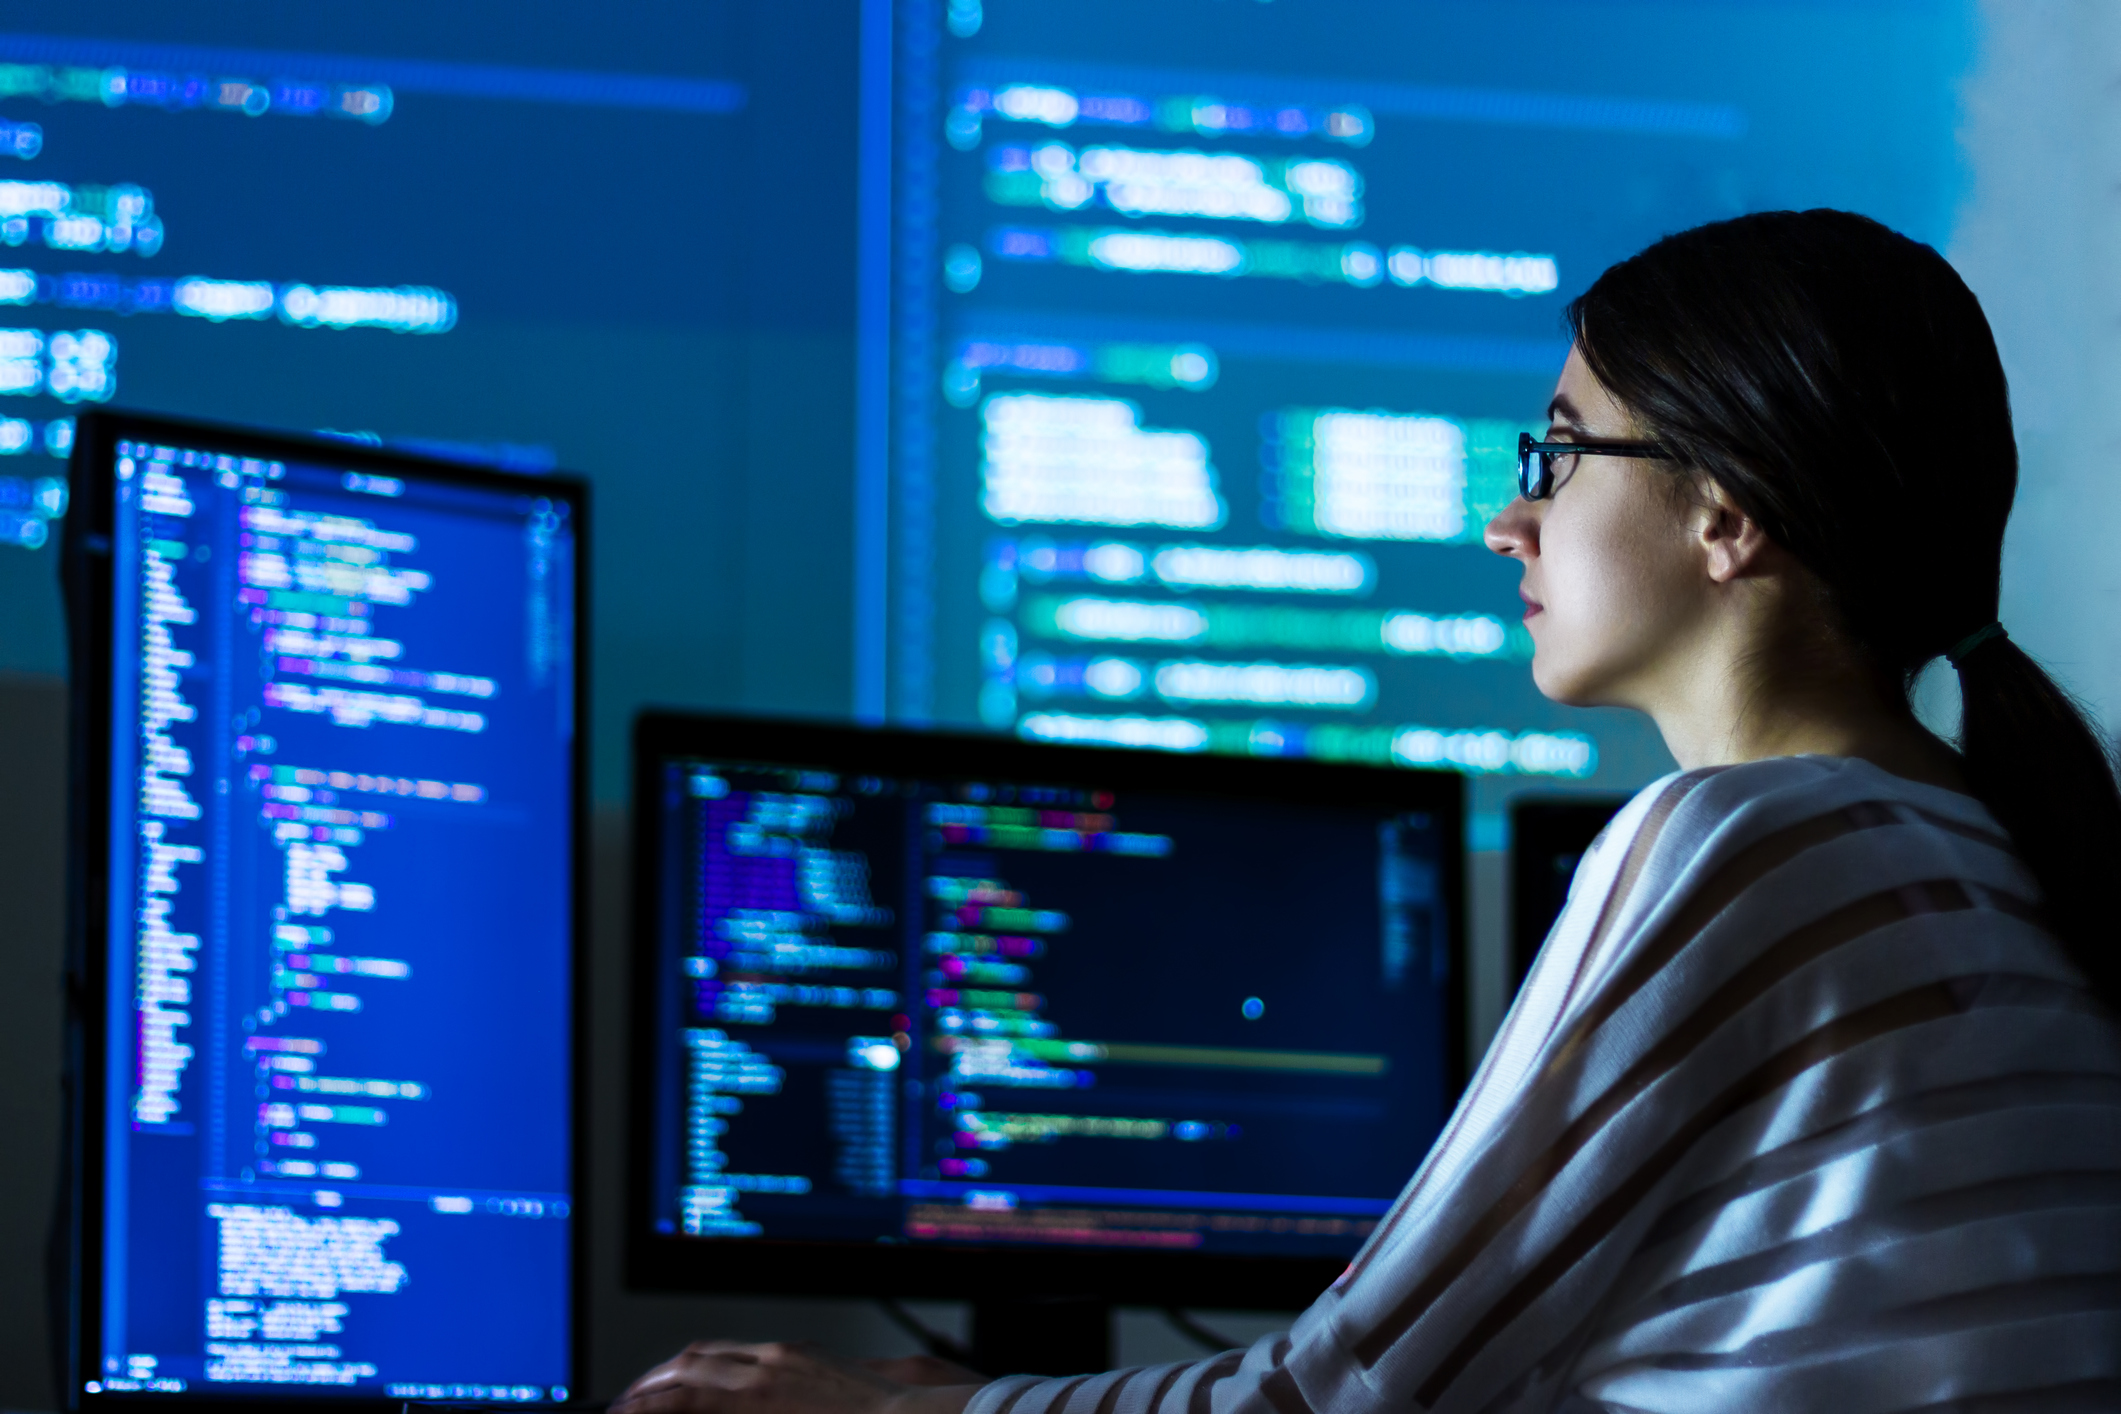 Female engineer looking at data on screen